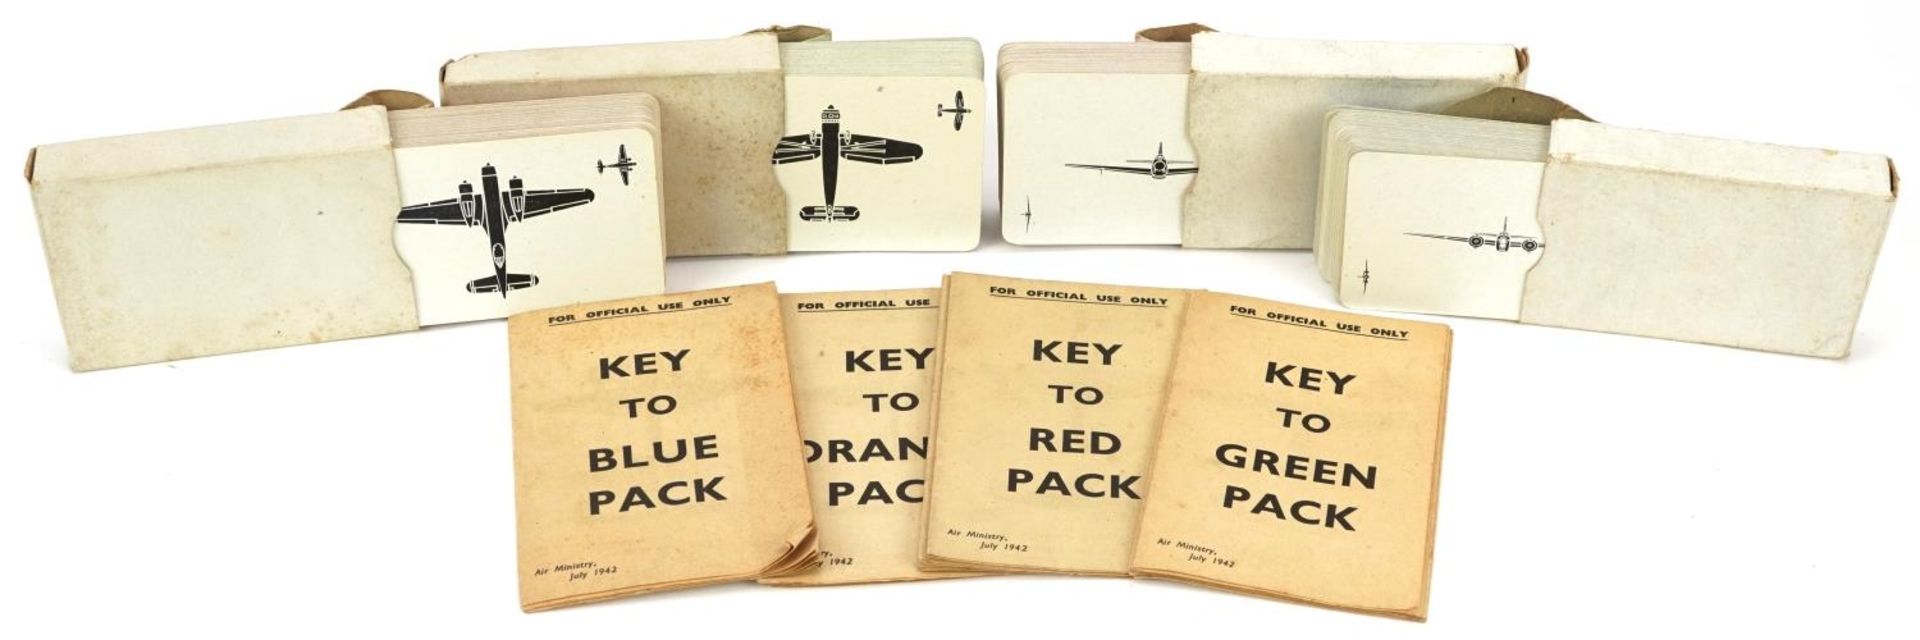 Four packs of military interest playing cards including Key to Blue pack and Key to Green pack : For